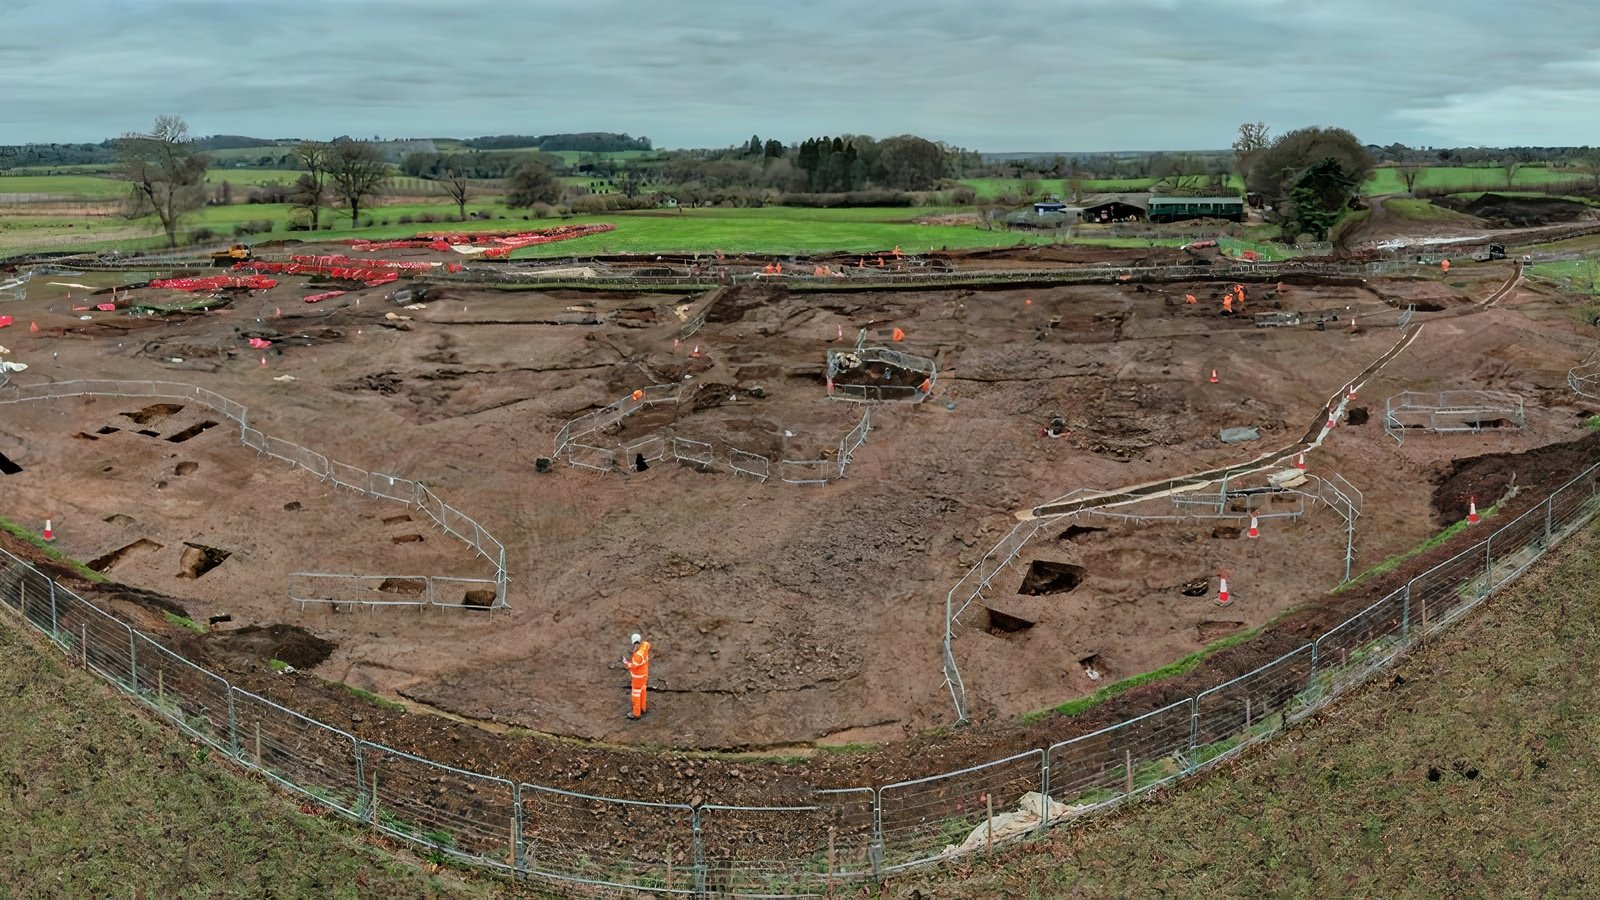 HS2 archaeologists discover Romanization of Iron Age village in Britain